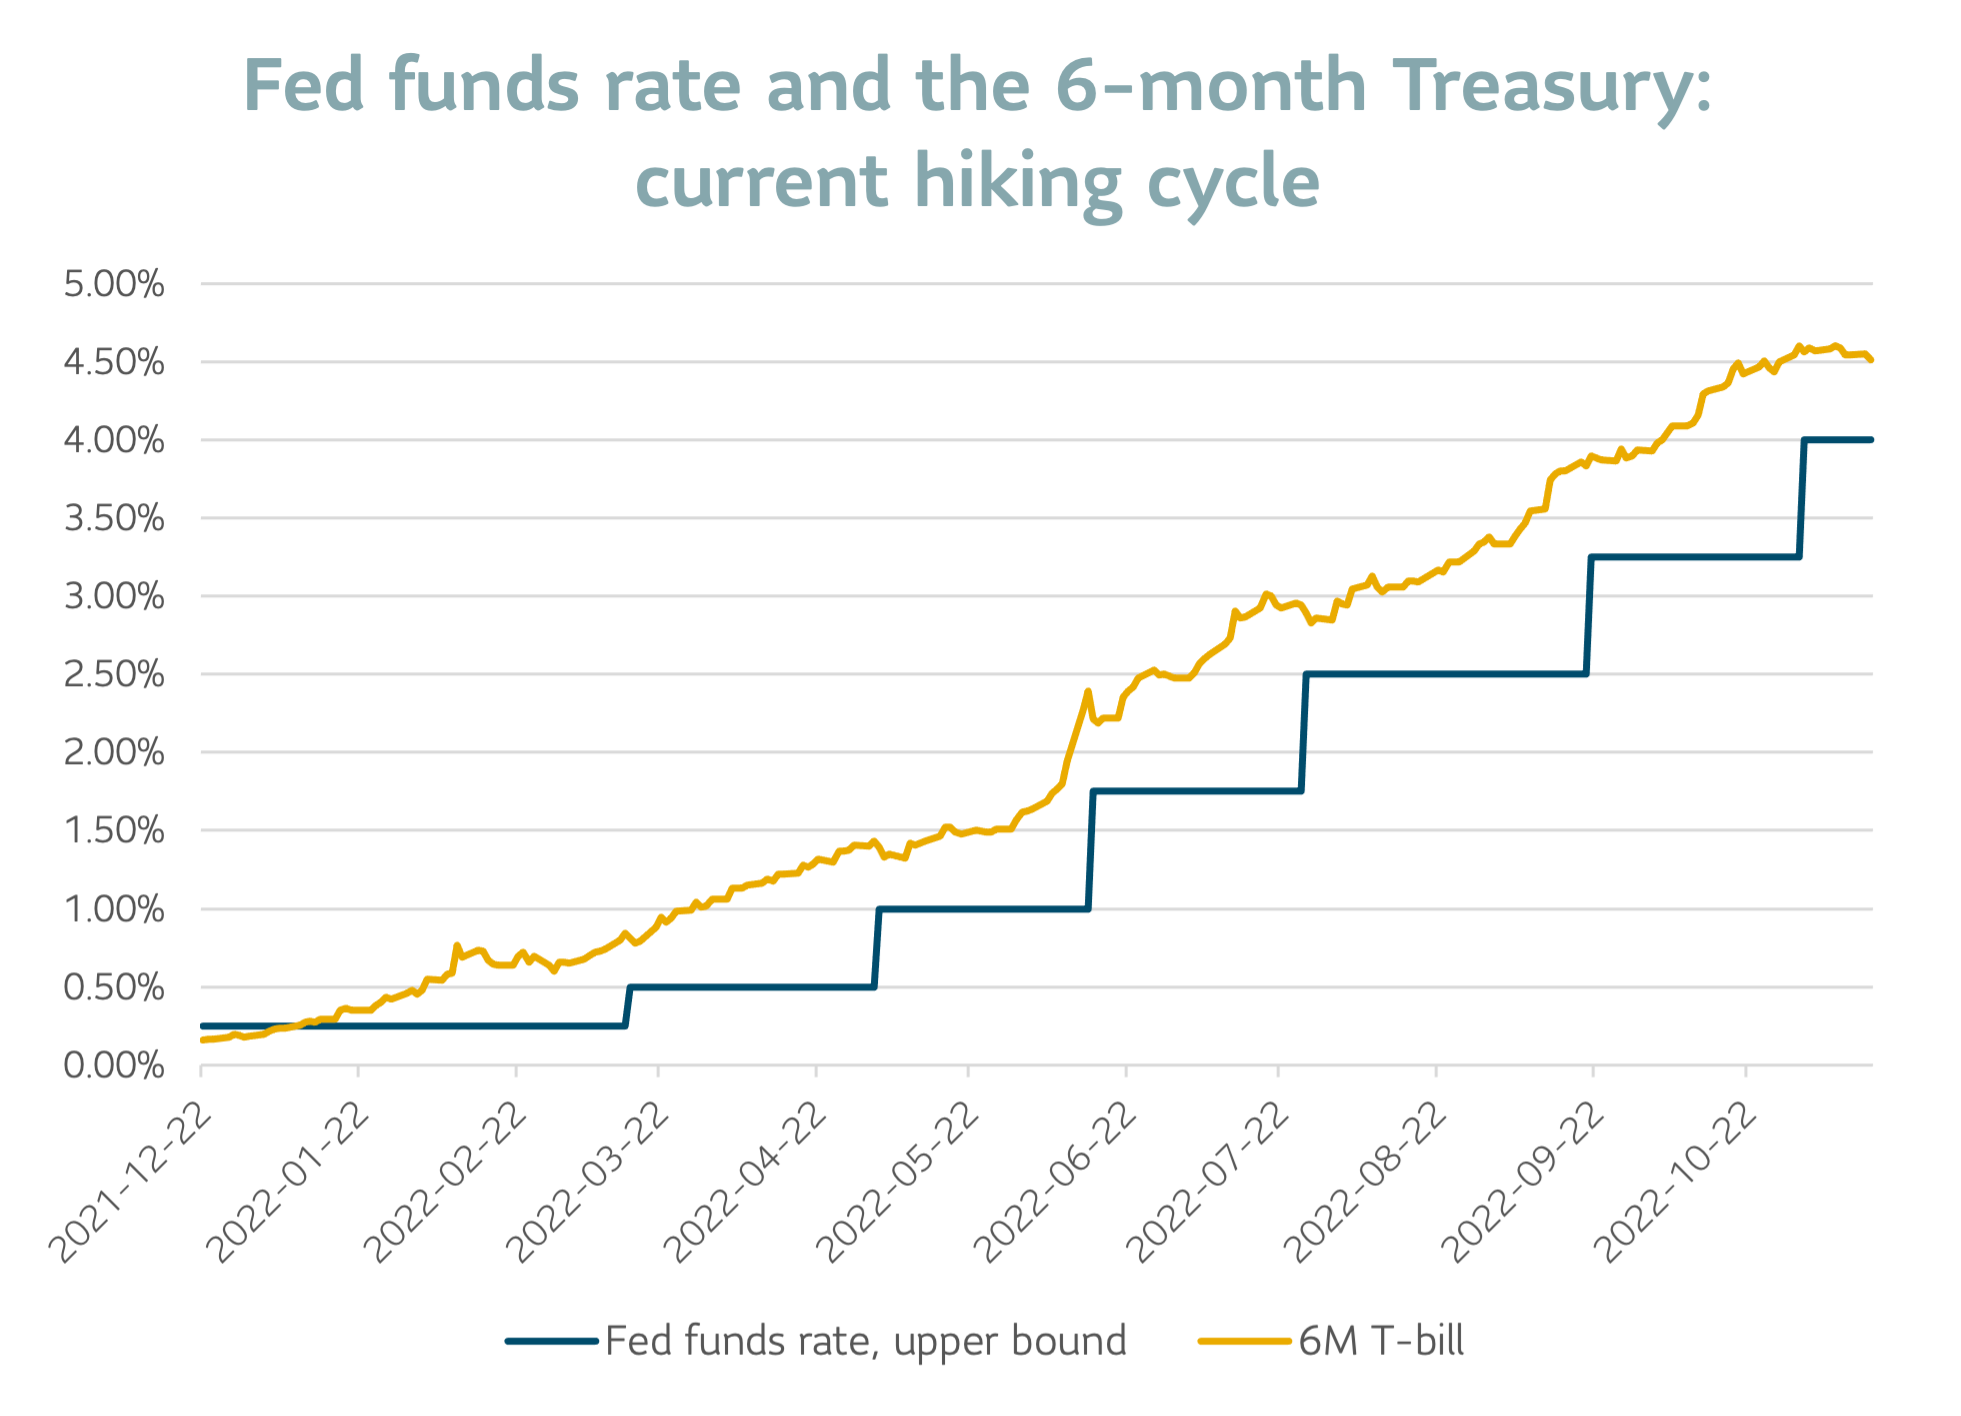 Fed funds rate and the 6-month Treasury: current hiking cycle